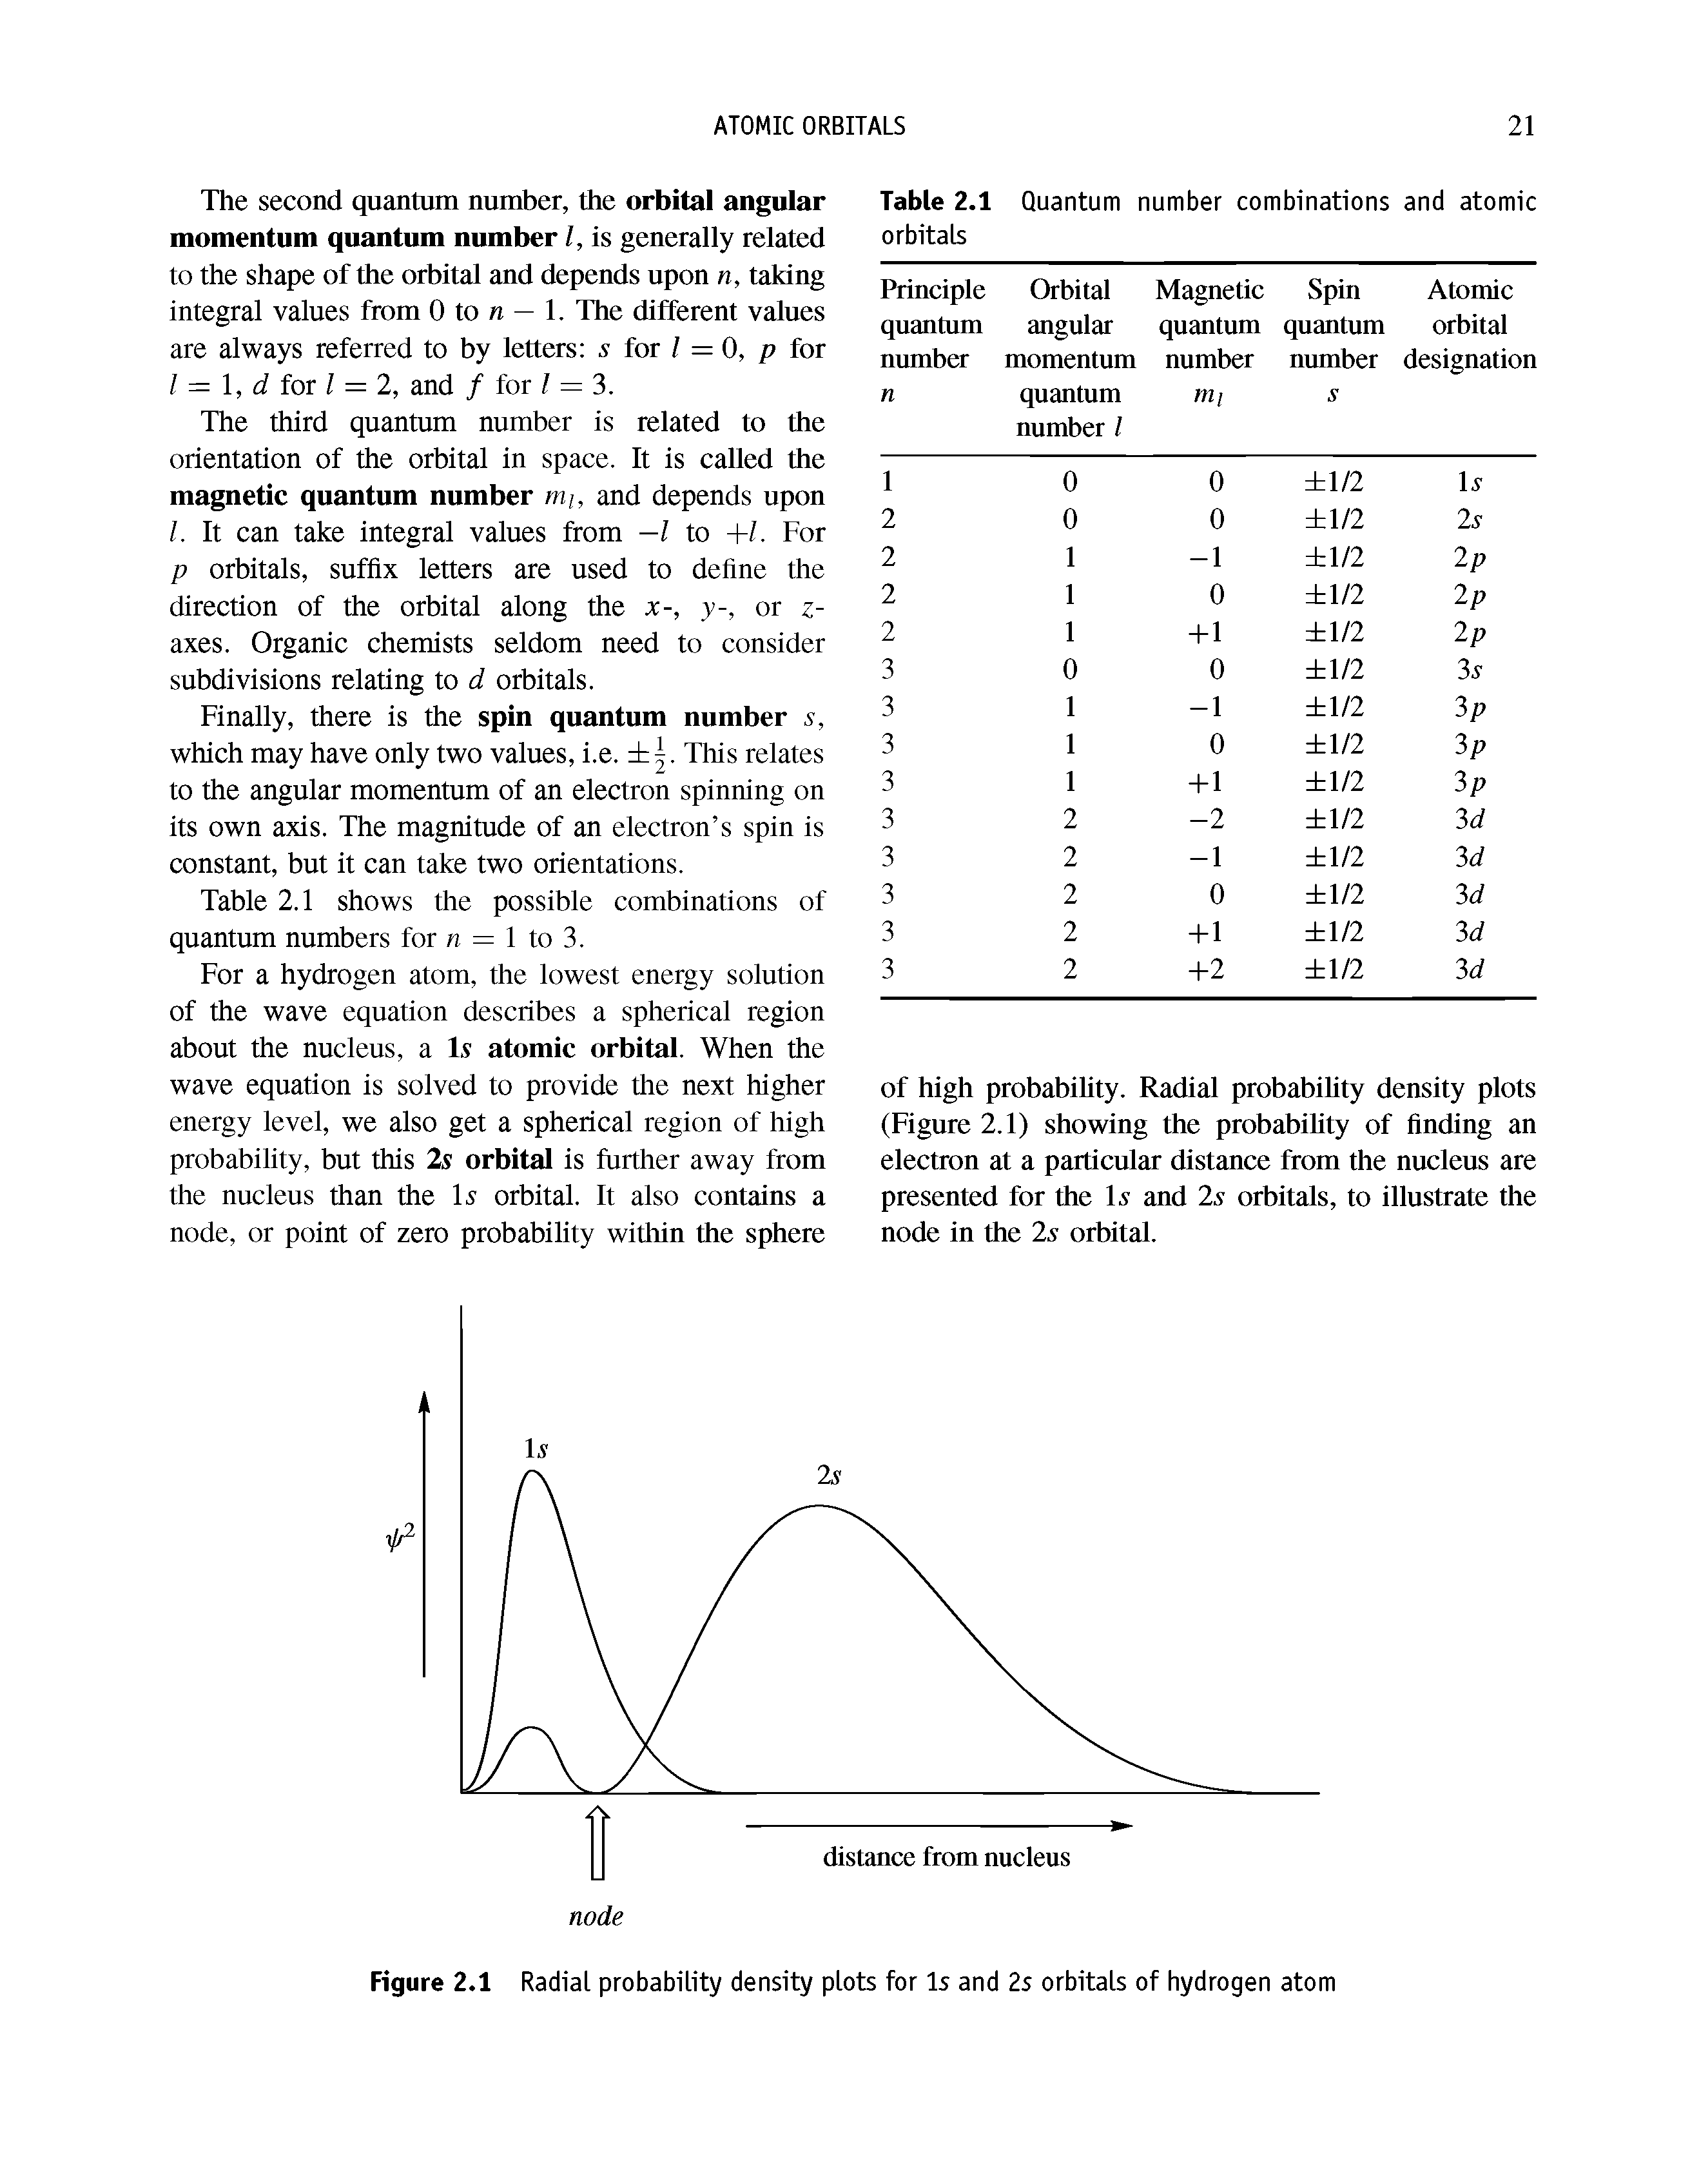 Figure 2.1 Radial probability density plots for Is and 2s orbitals of hydrogen atom...